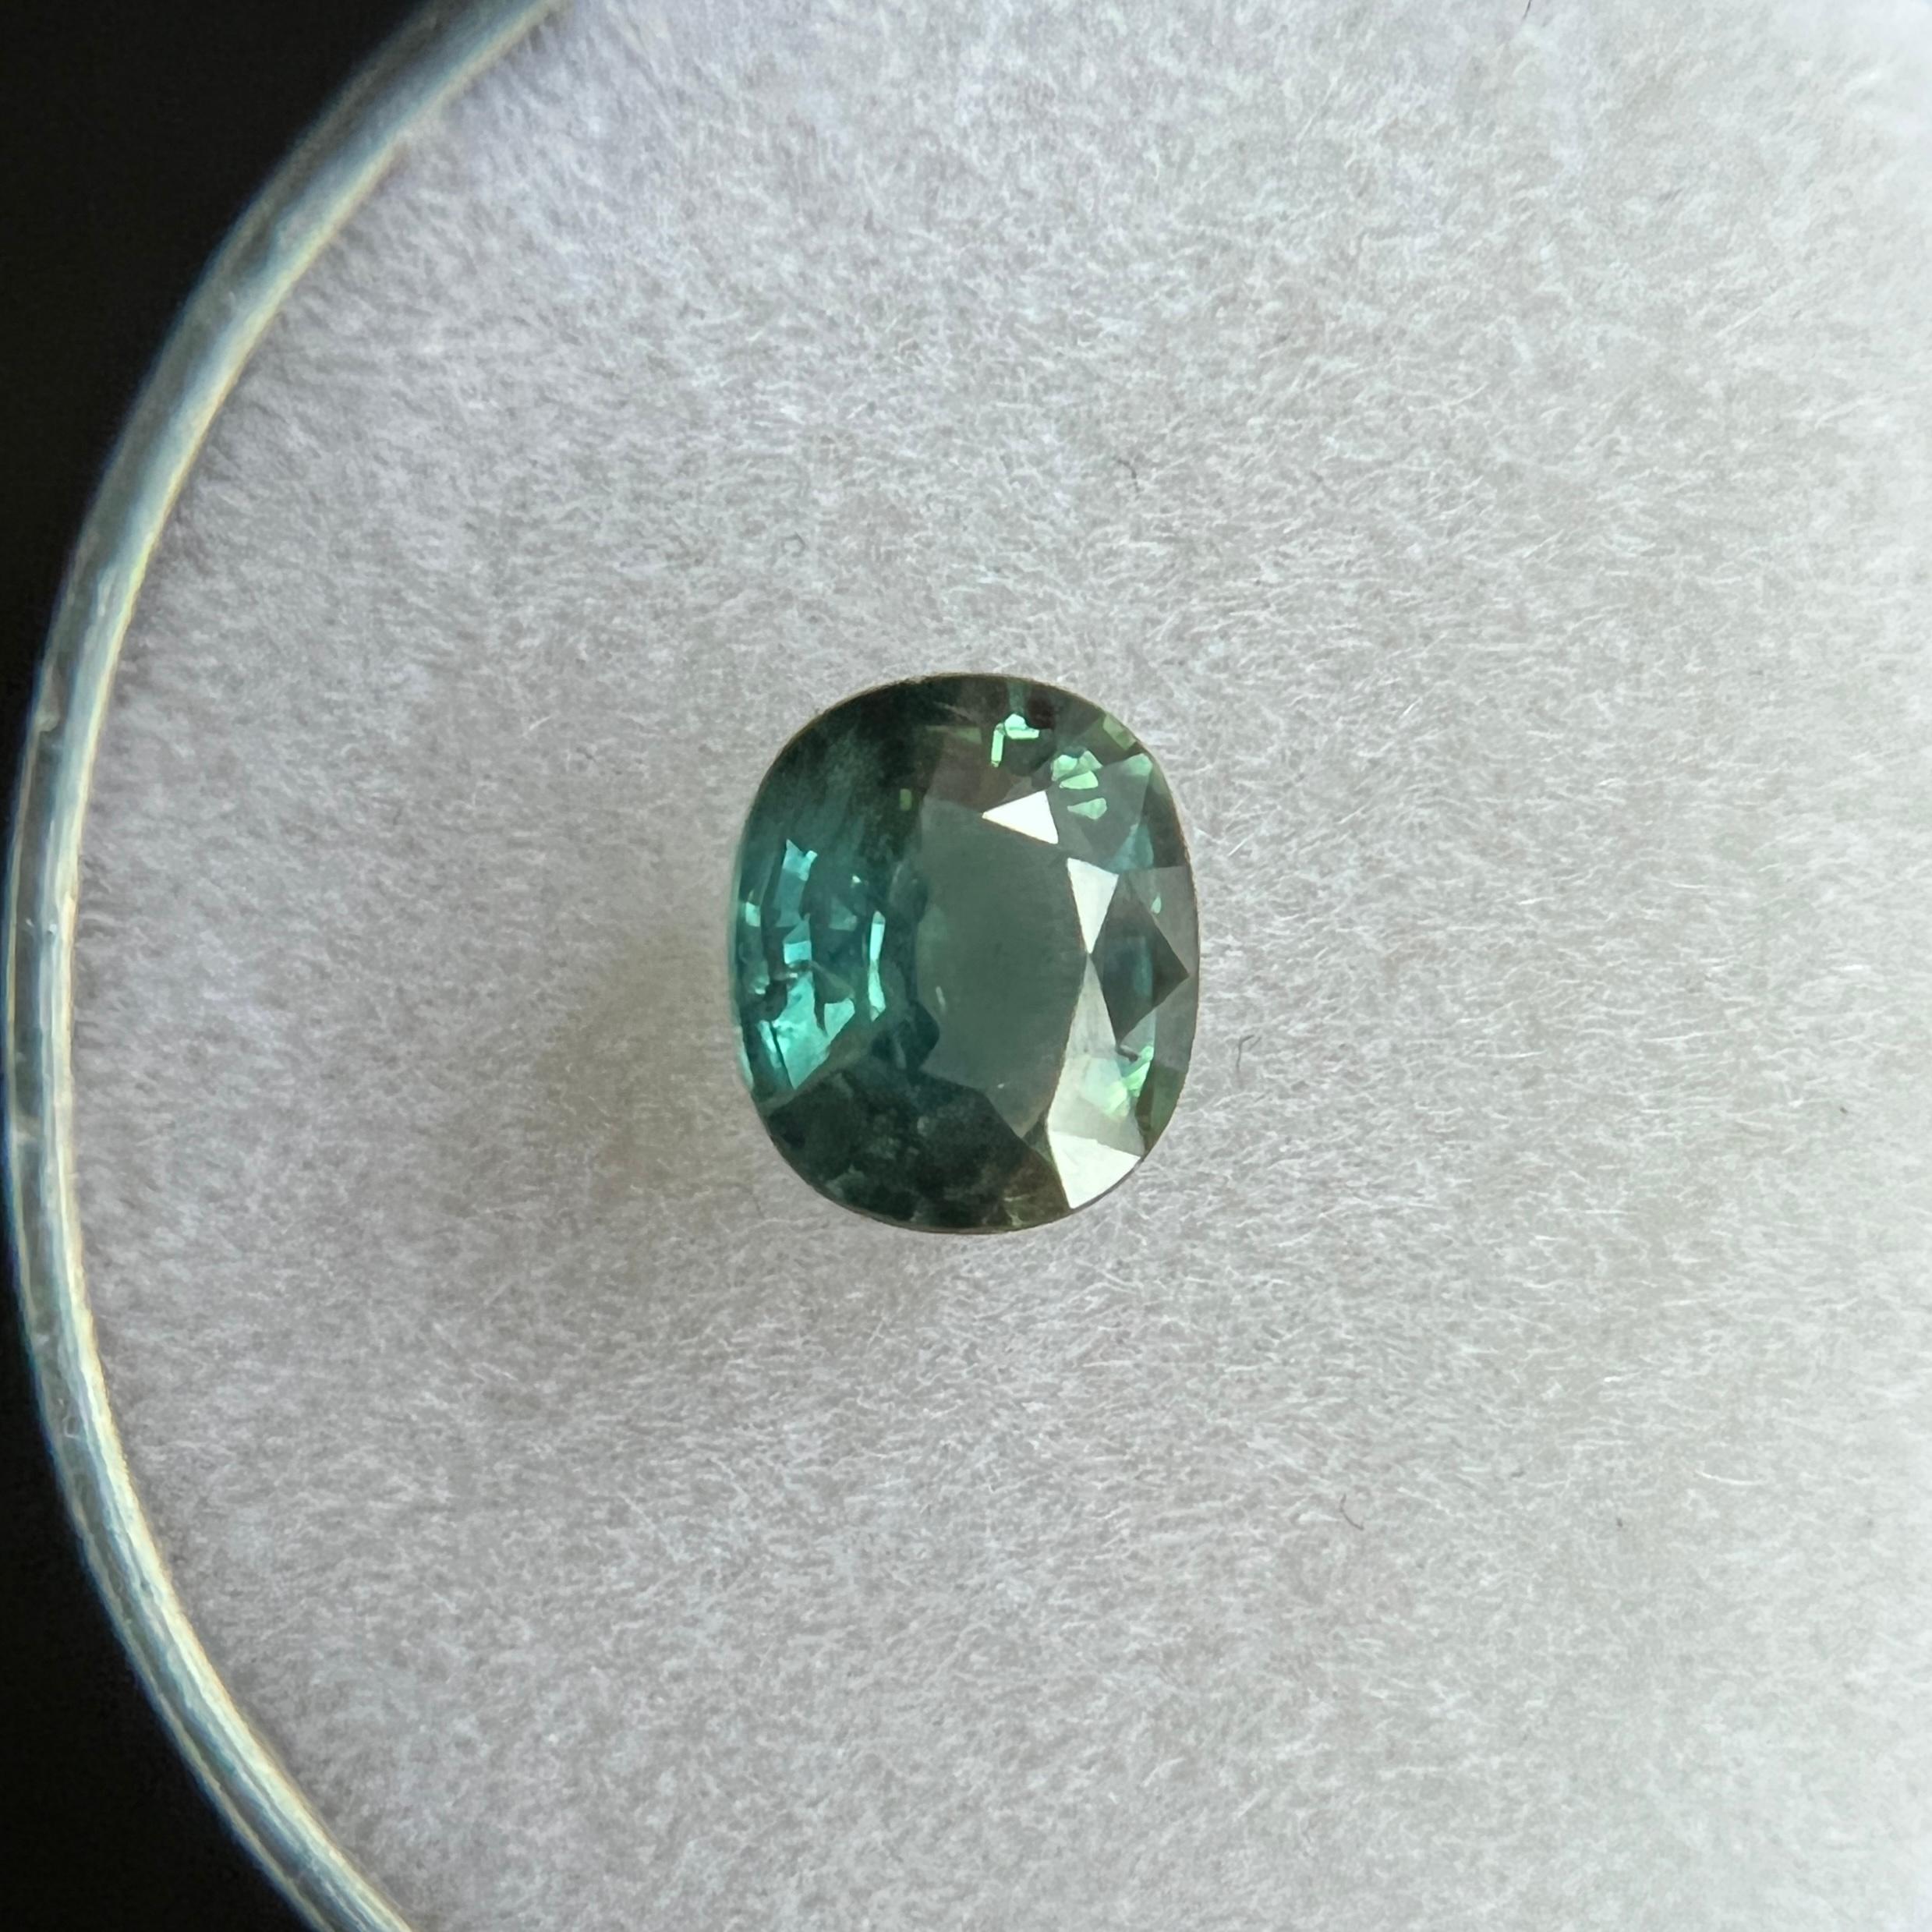 Vivid Blue Green Australian Sapphire Gemstone.

Natural sapphire with a stunning deep greenish blue colour. 1.03 Carat with good clarity. Clean stone with only some very small natural inclusions visible when looking closely.

Also has a very good